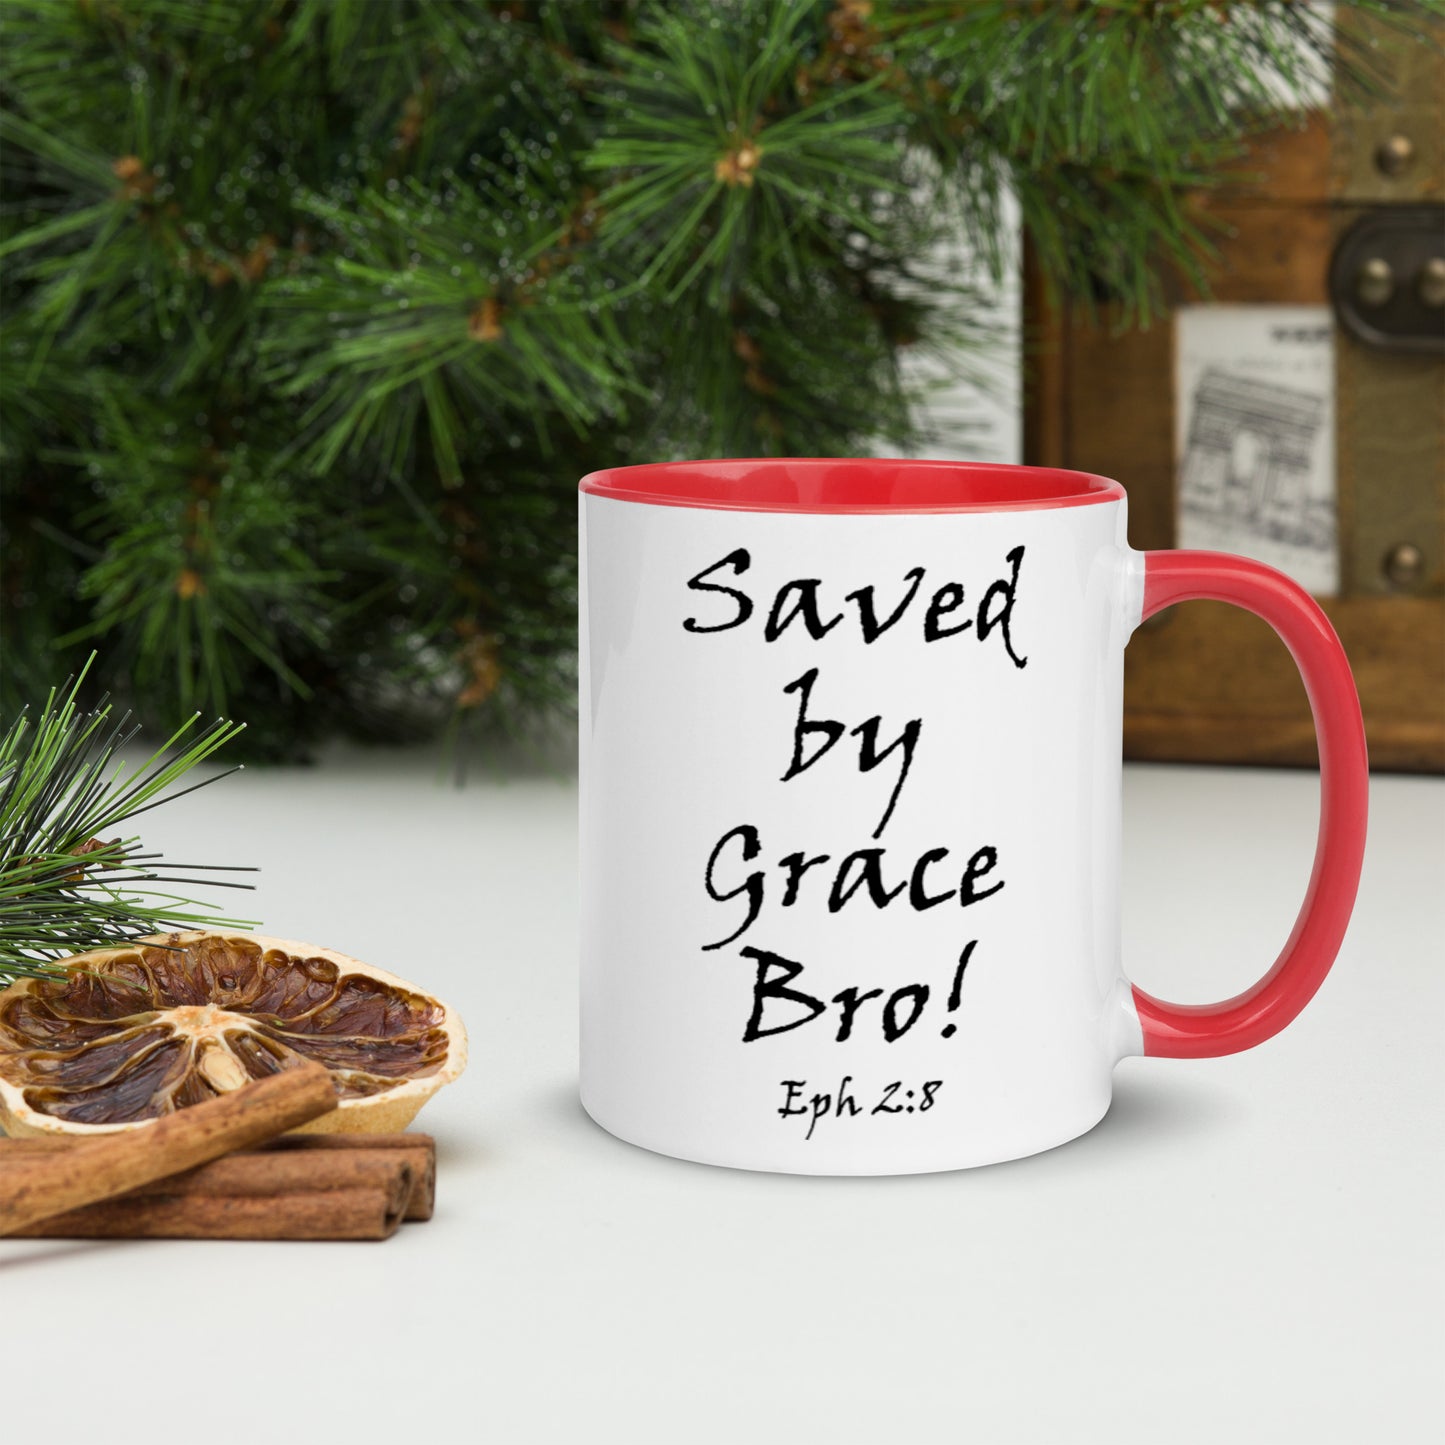 Saved by Grace Bro! White Mug w/ Color - Solid Rock Designs | Christian Apparel